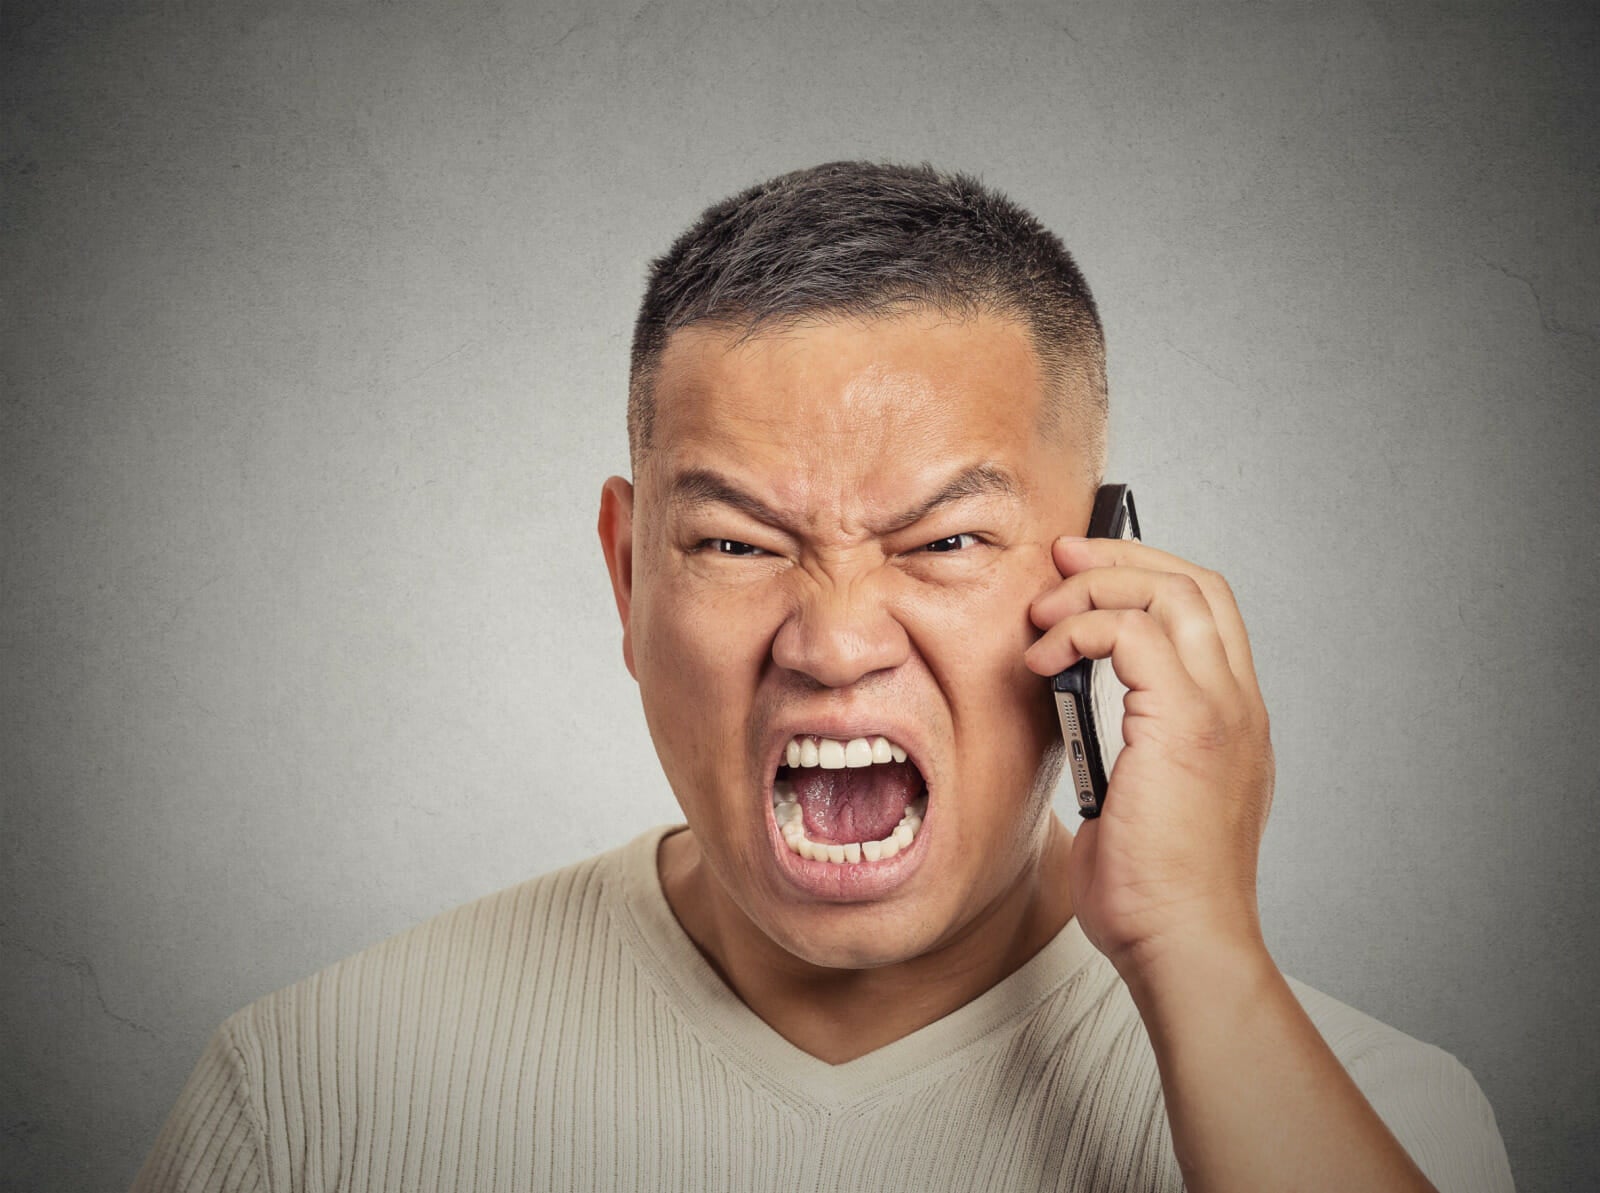 asian man talking on phone pissed angry 123rf